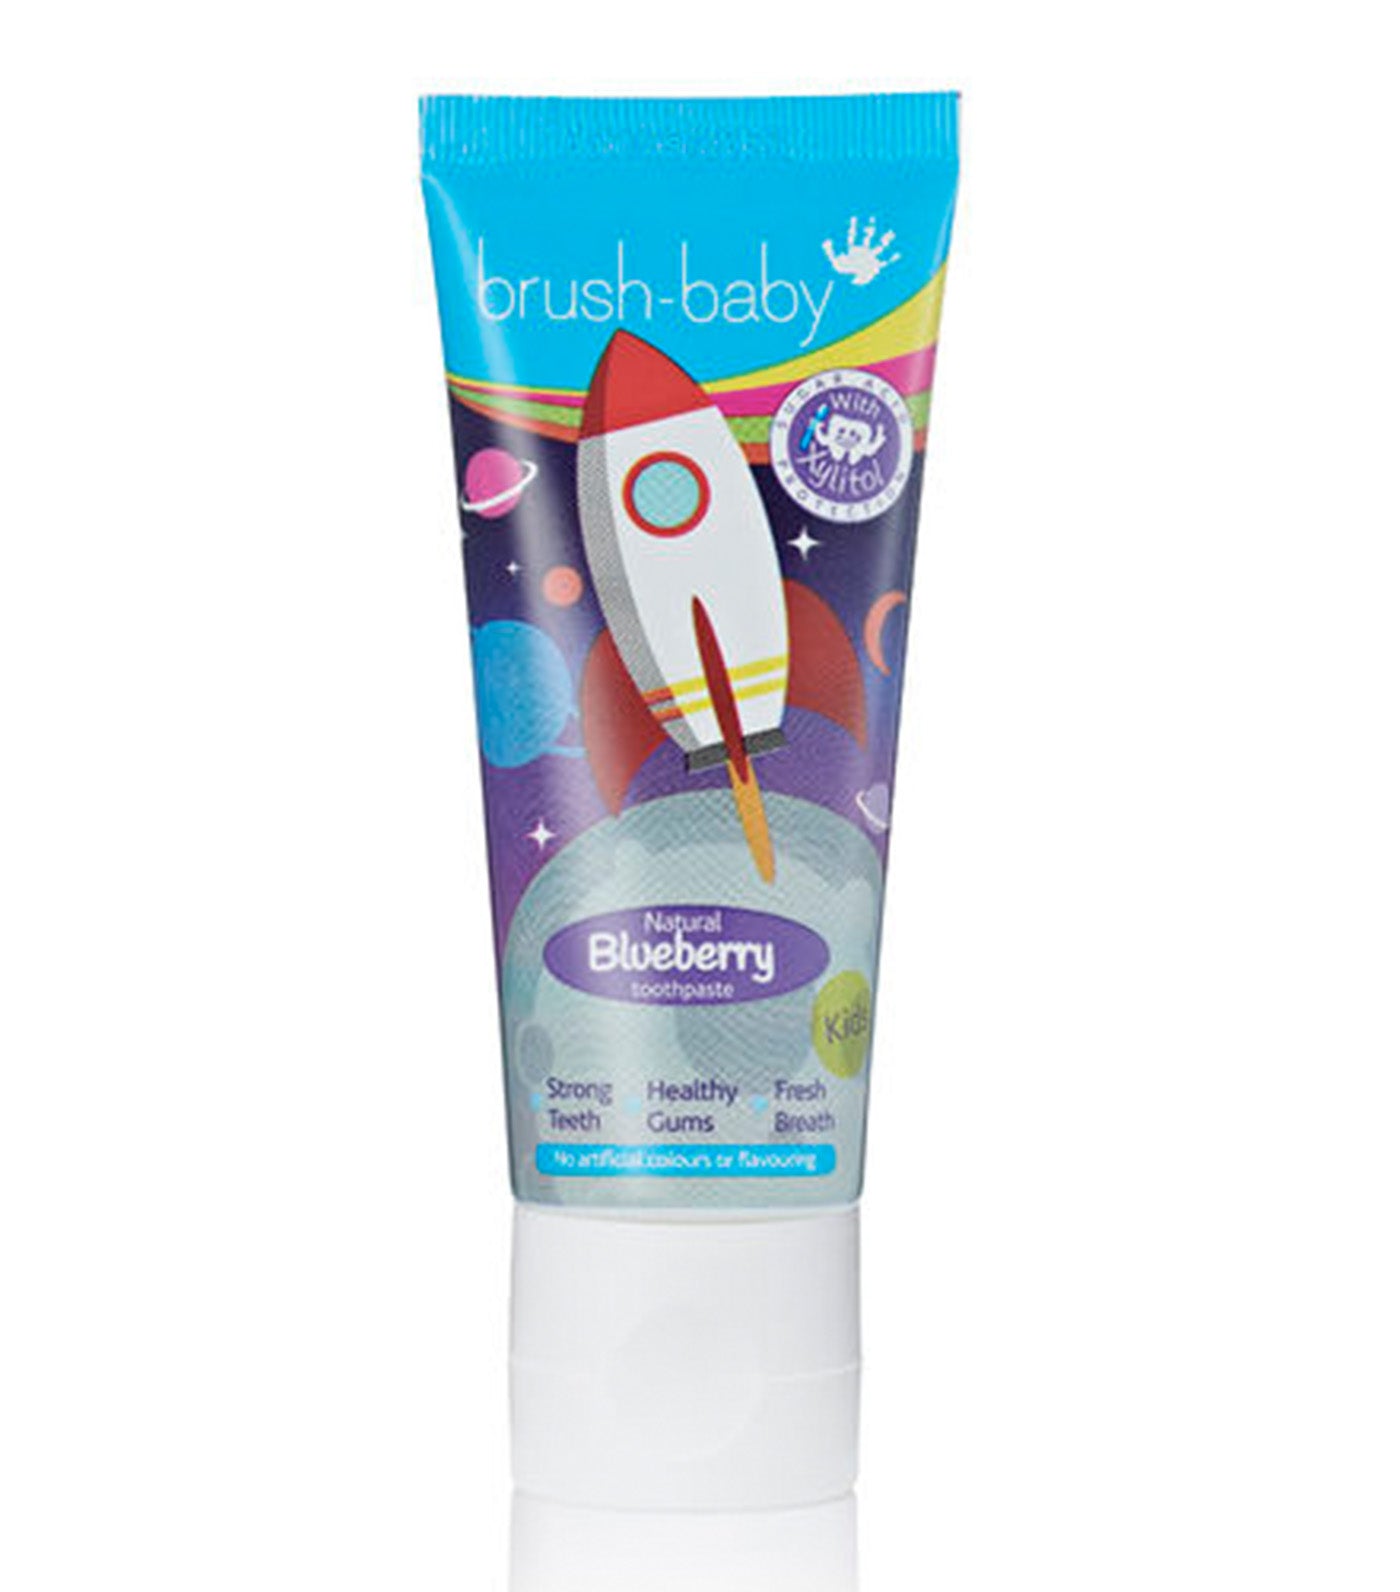 Natural Blueberry Toothpaste 50ml - Rocket